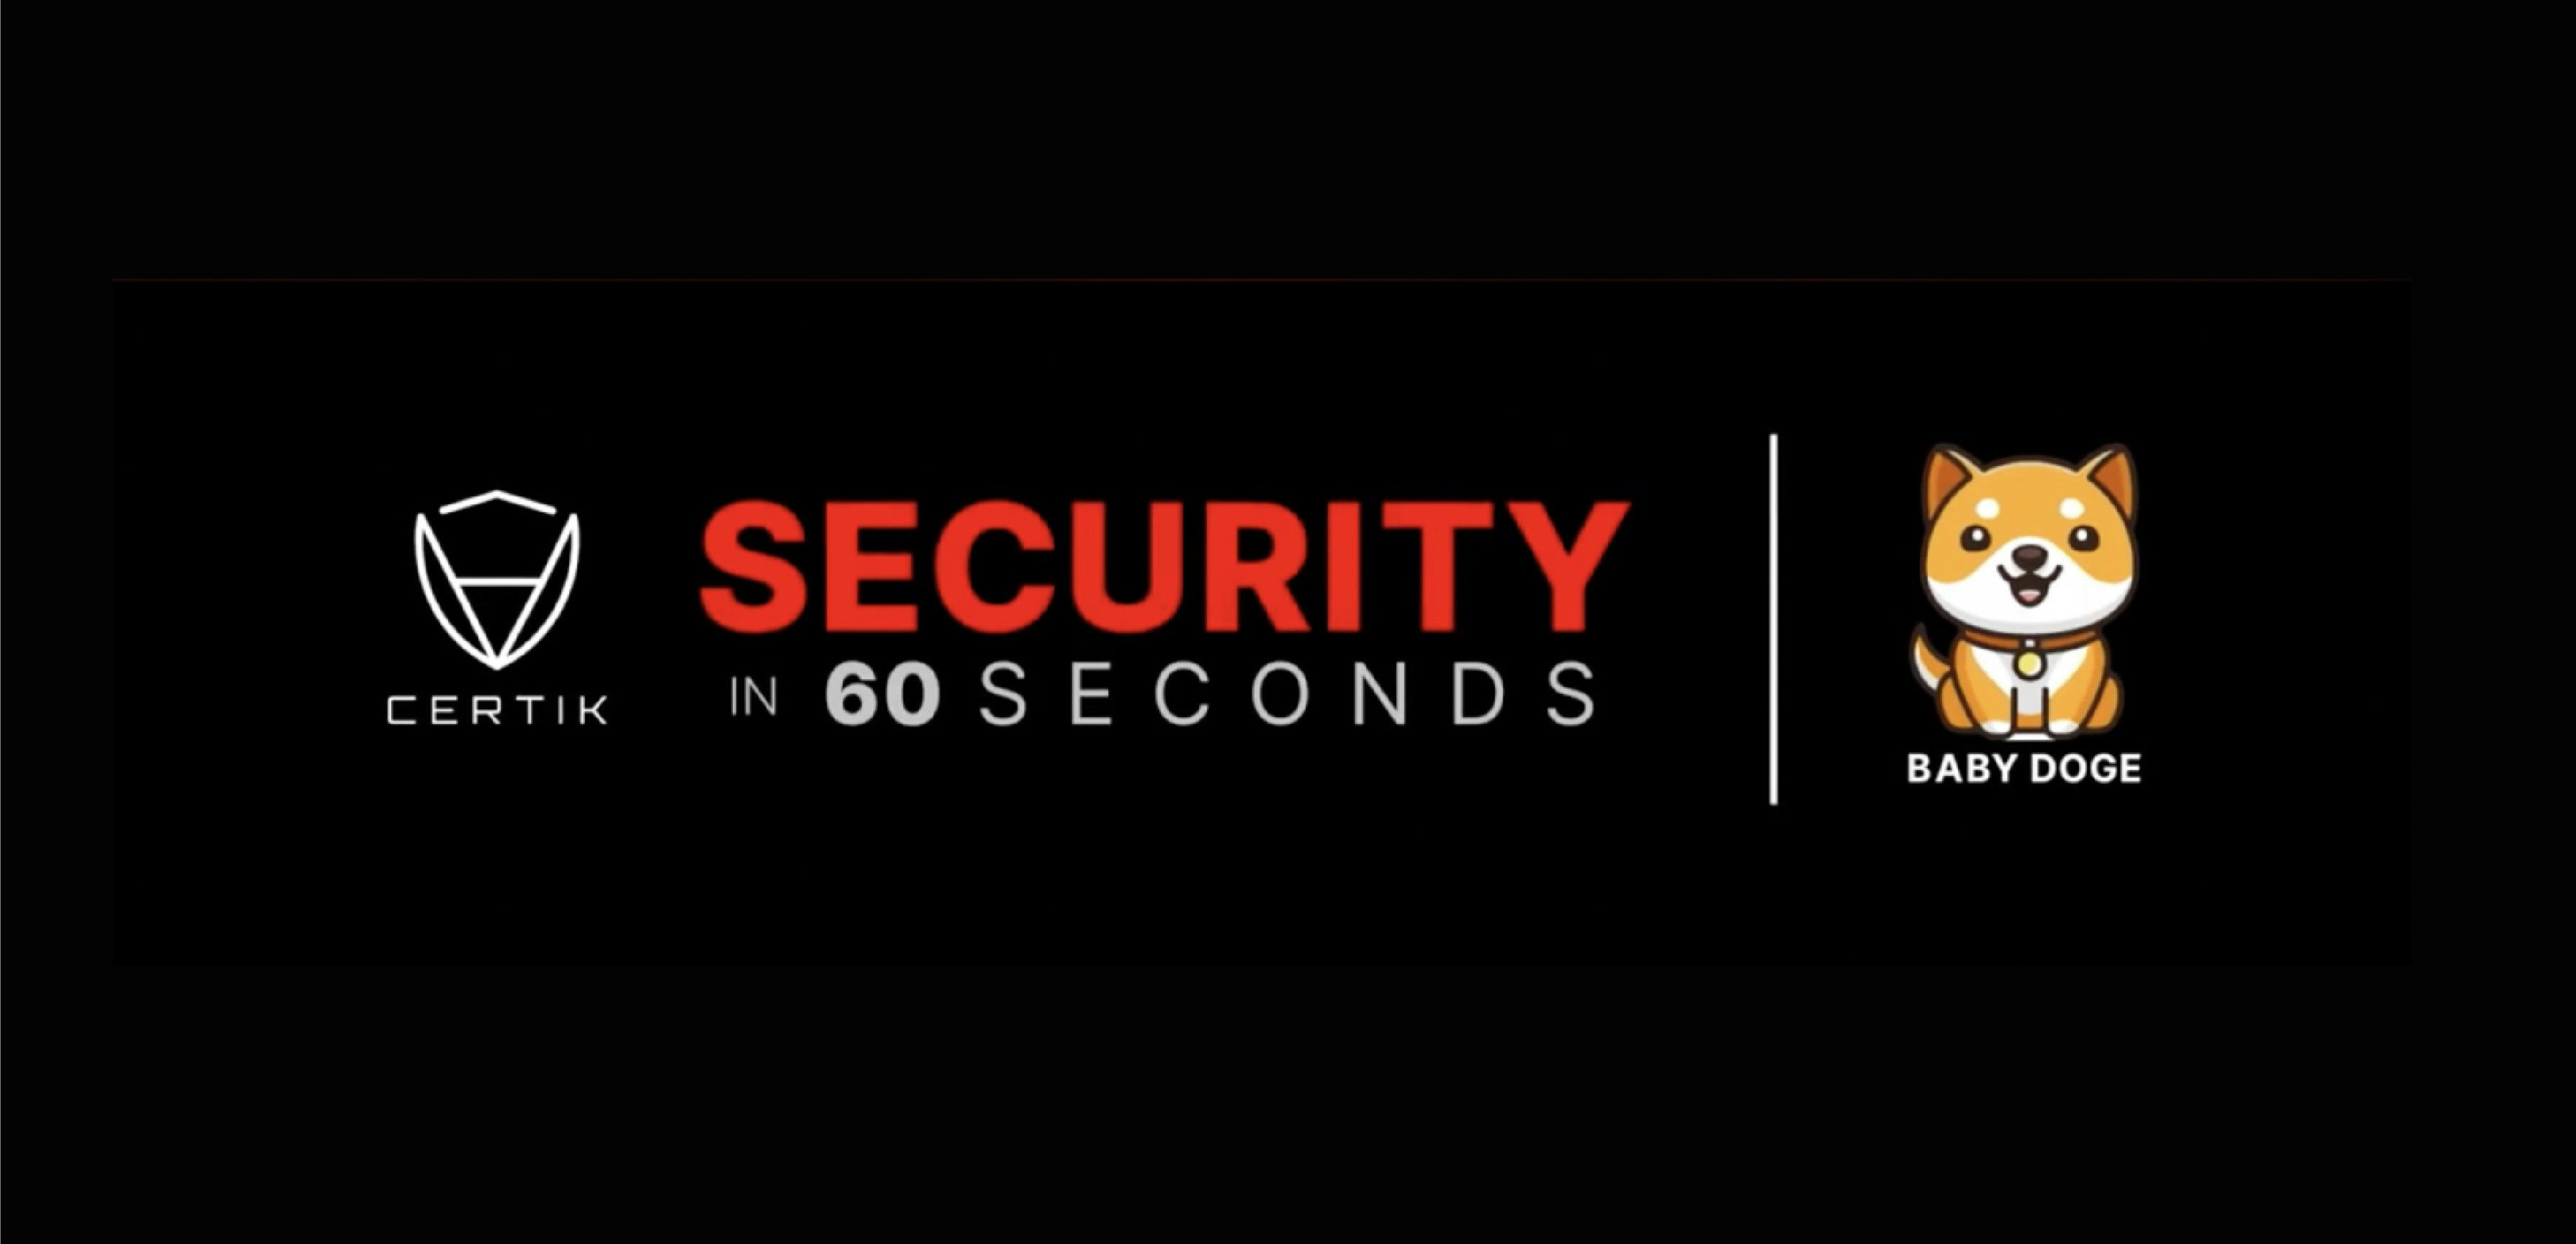 Security in 60 Seconds - BabyDoge